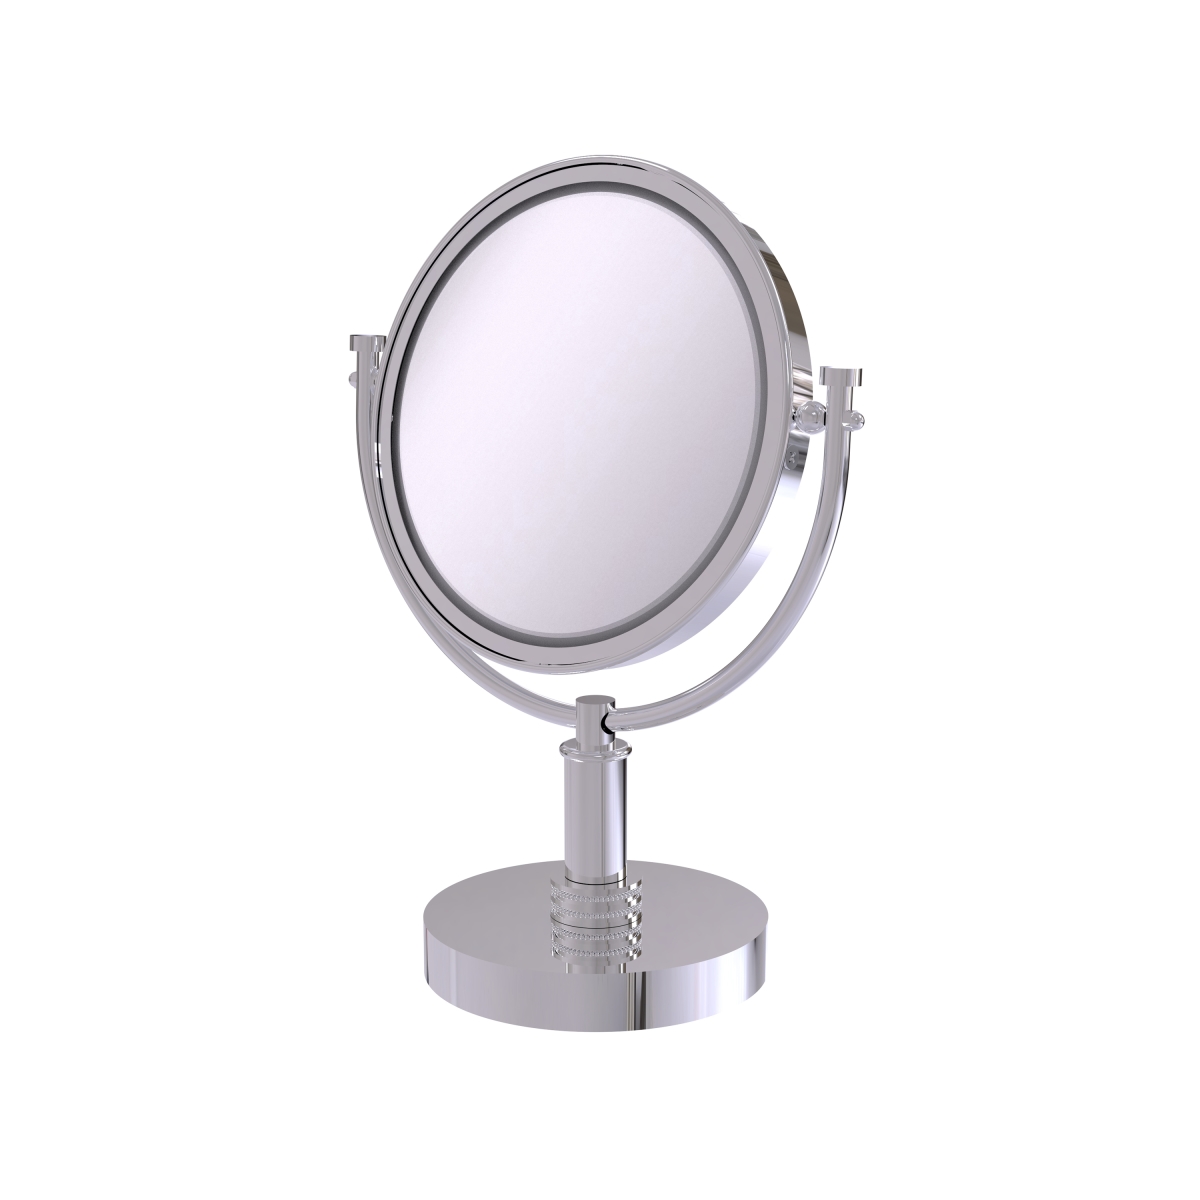 Picture of Allied Brass DM-4D-3X-PC 8 in. Vanity Top Make-Up Mirror 3X Magnification, Polished Chrome - 15 x 8 x 8 in.